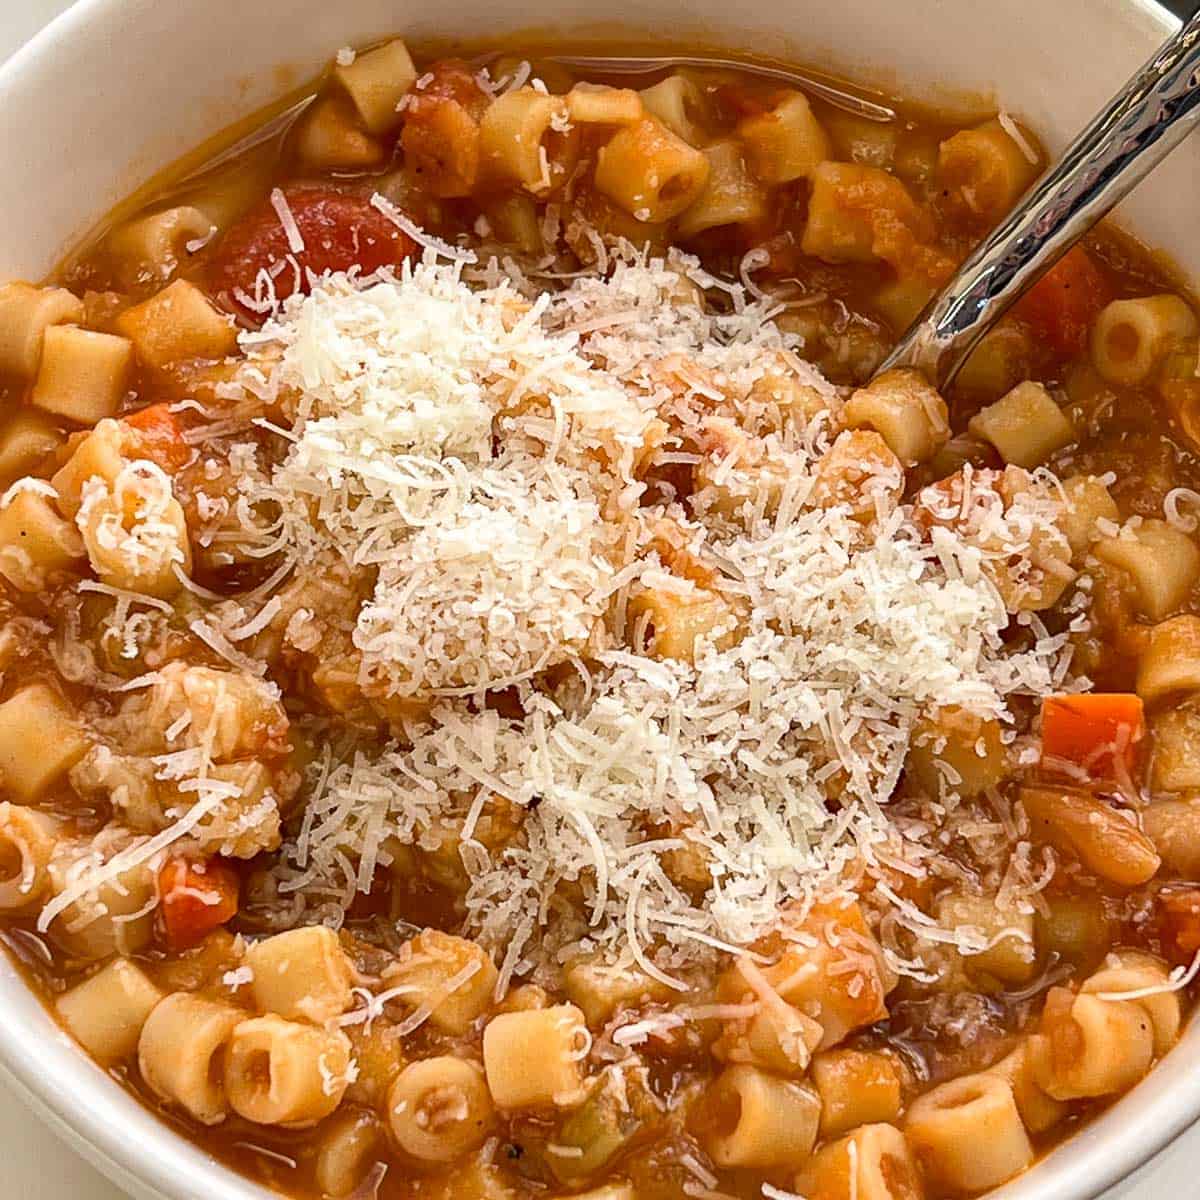 Image showing a bowl of Pasta Fagioli sprinkled with parmesan cheese with a silver spoon in the bowl.